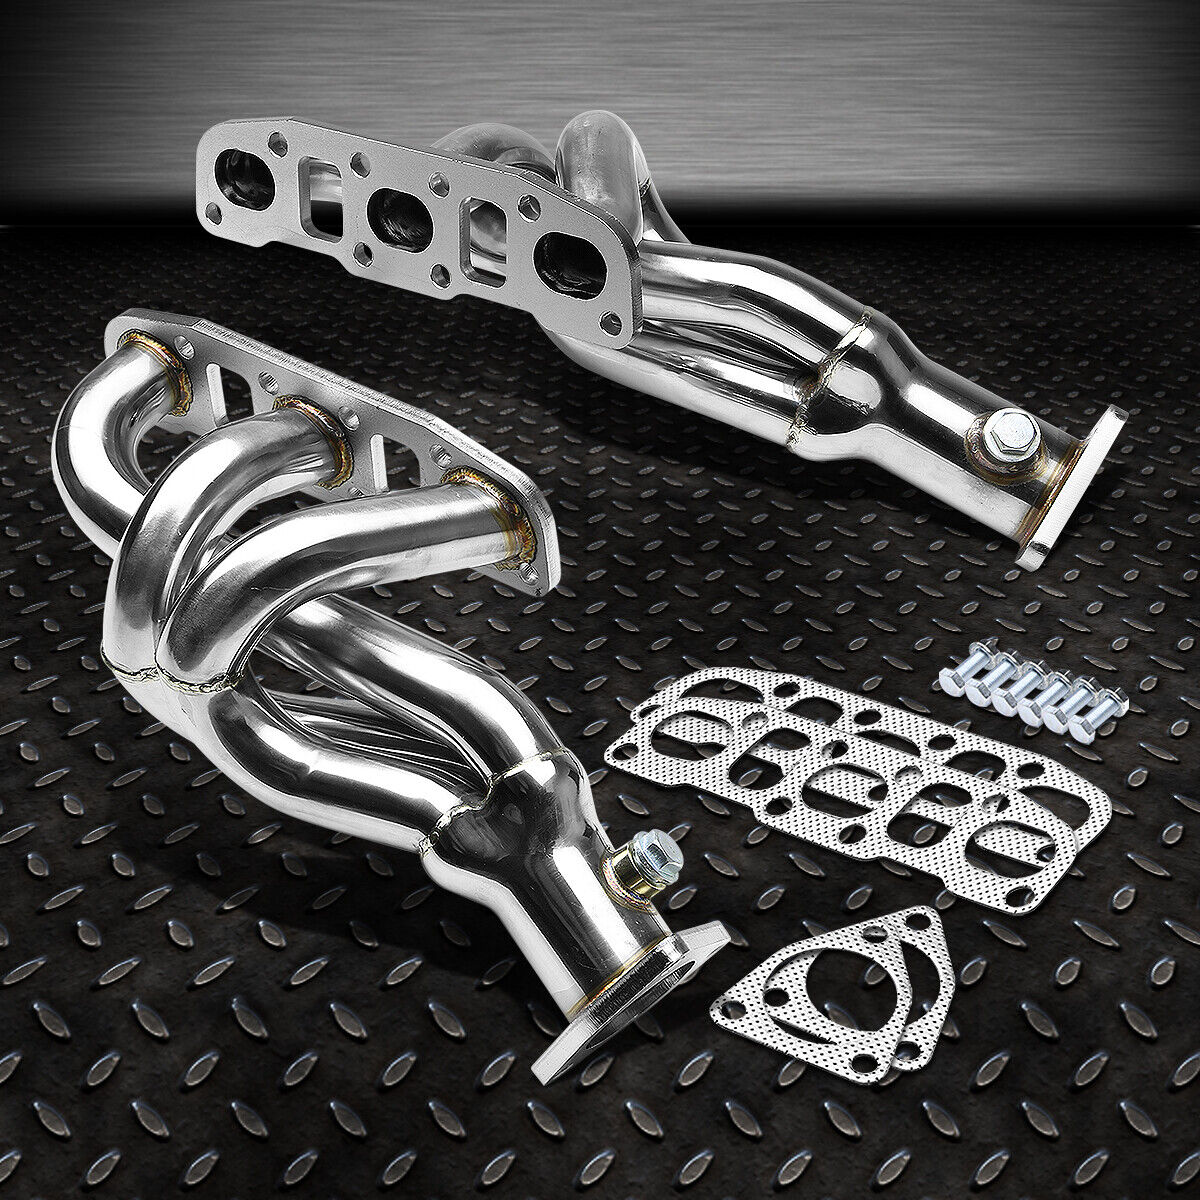 FOR 03-09 NISSAN 350Z/Z33 INFINITI G35 STAINLESS EXHAUST HEADER MANIFOLD+GASKET